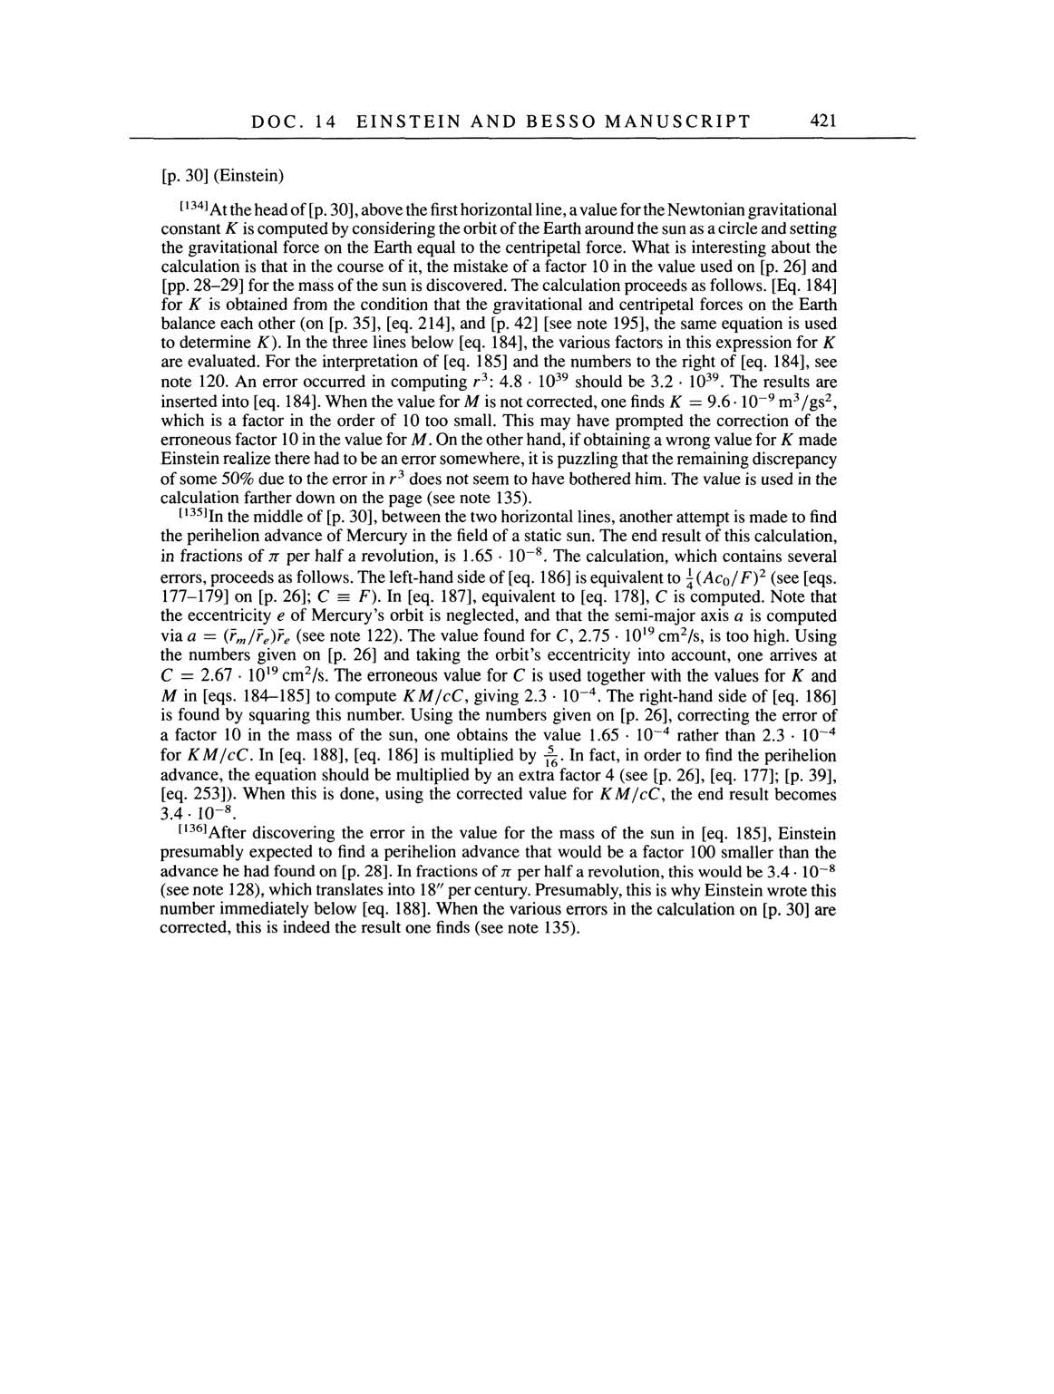 Volume 4: The Swiss Years: Writings 1912-1914 page 421